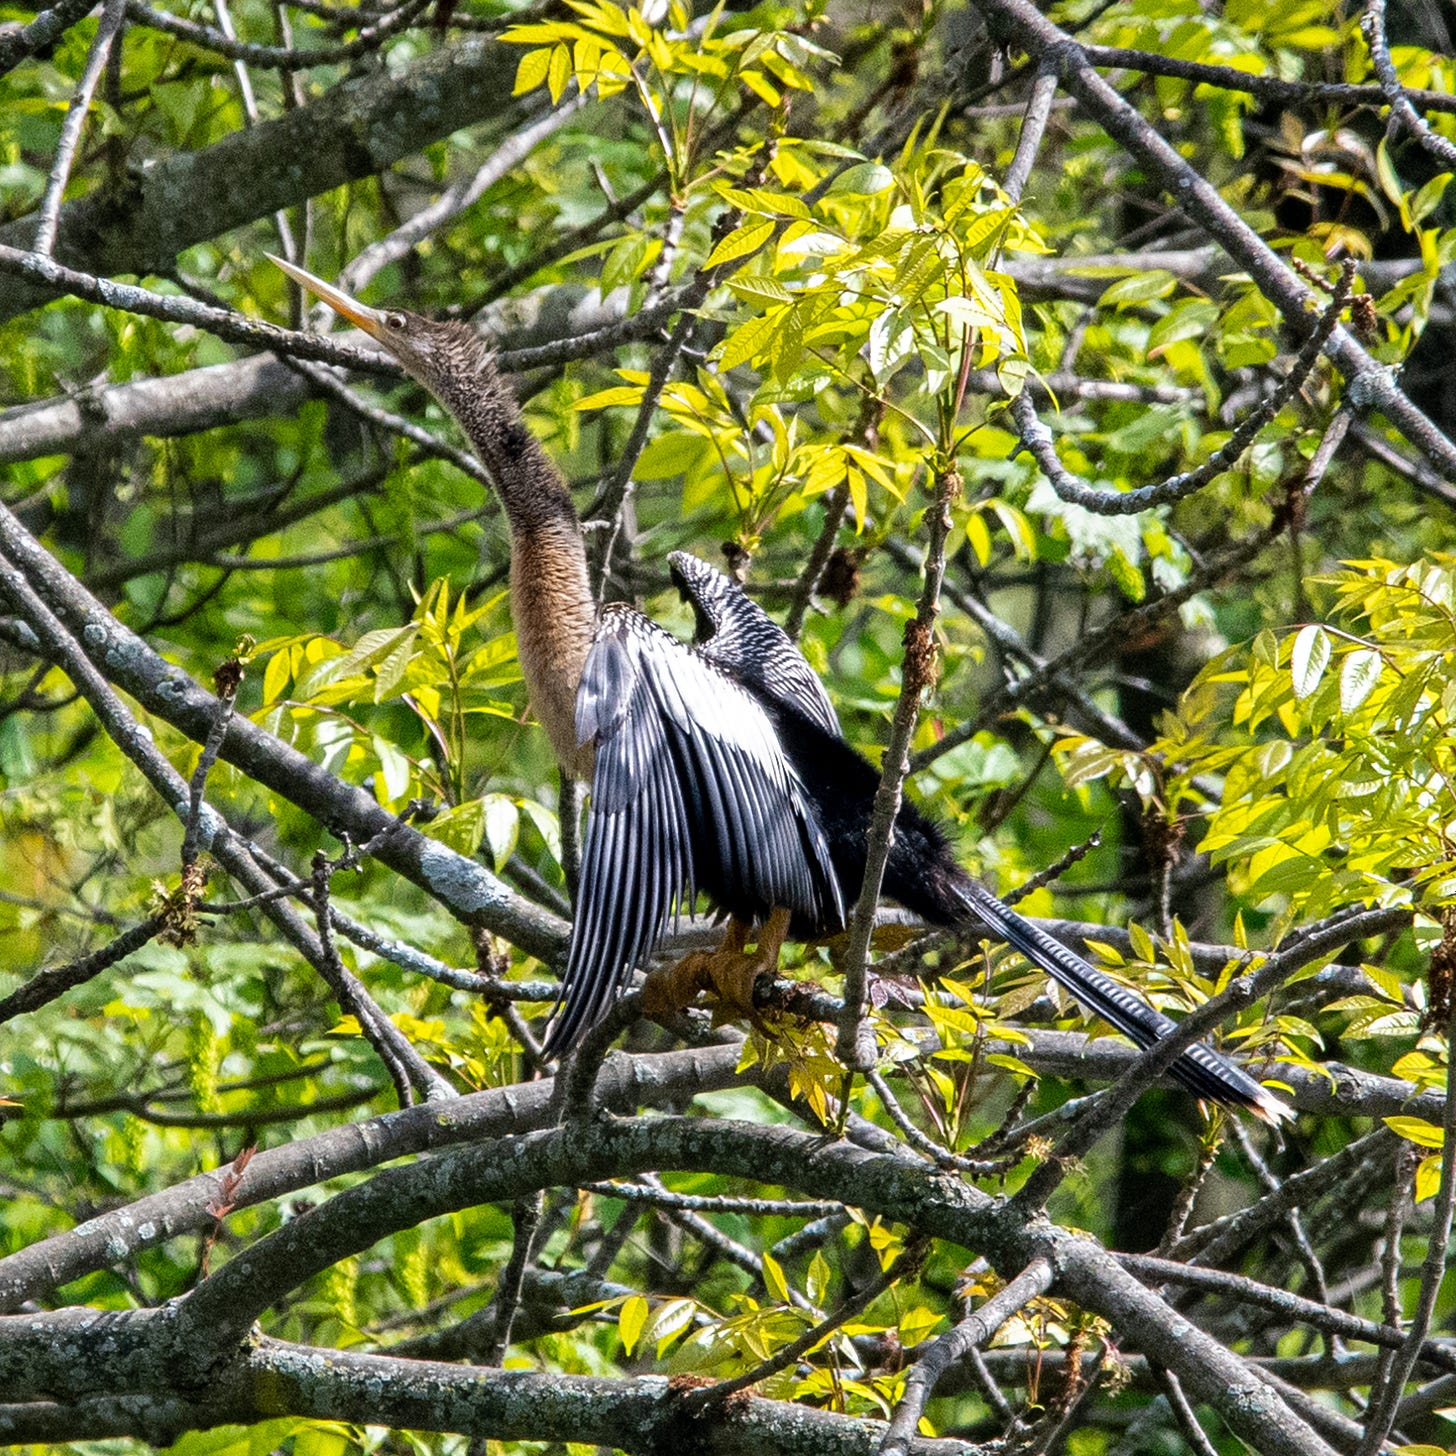 An anhinga has opened its wings to dry them